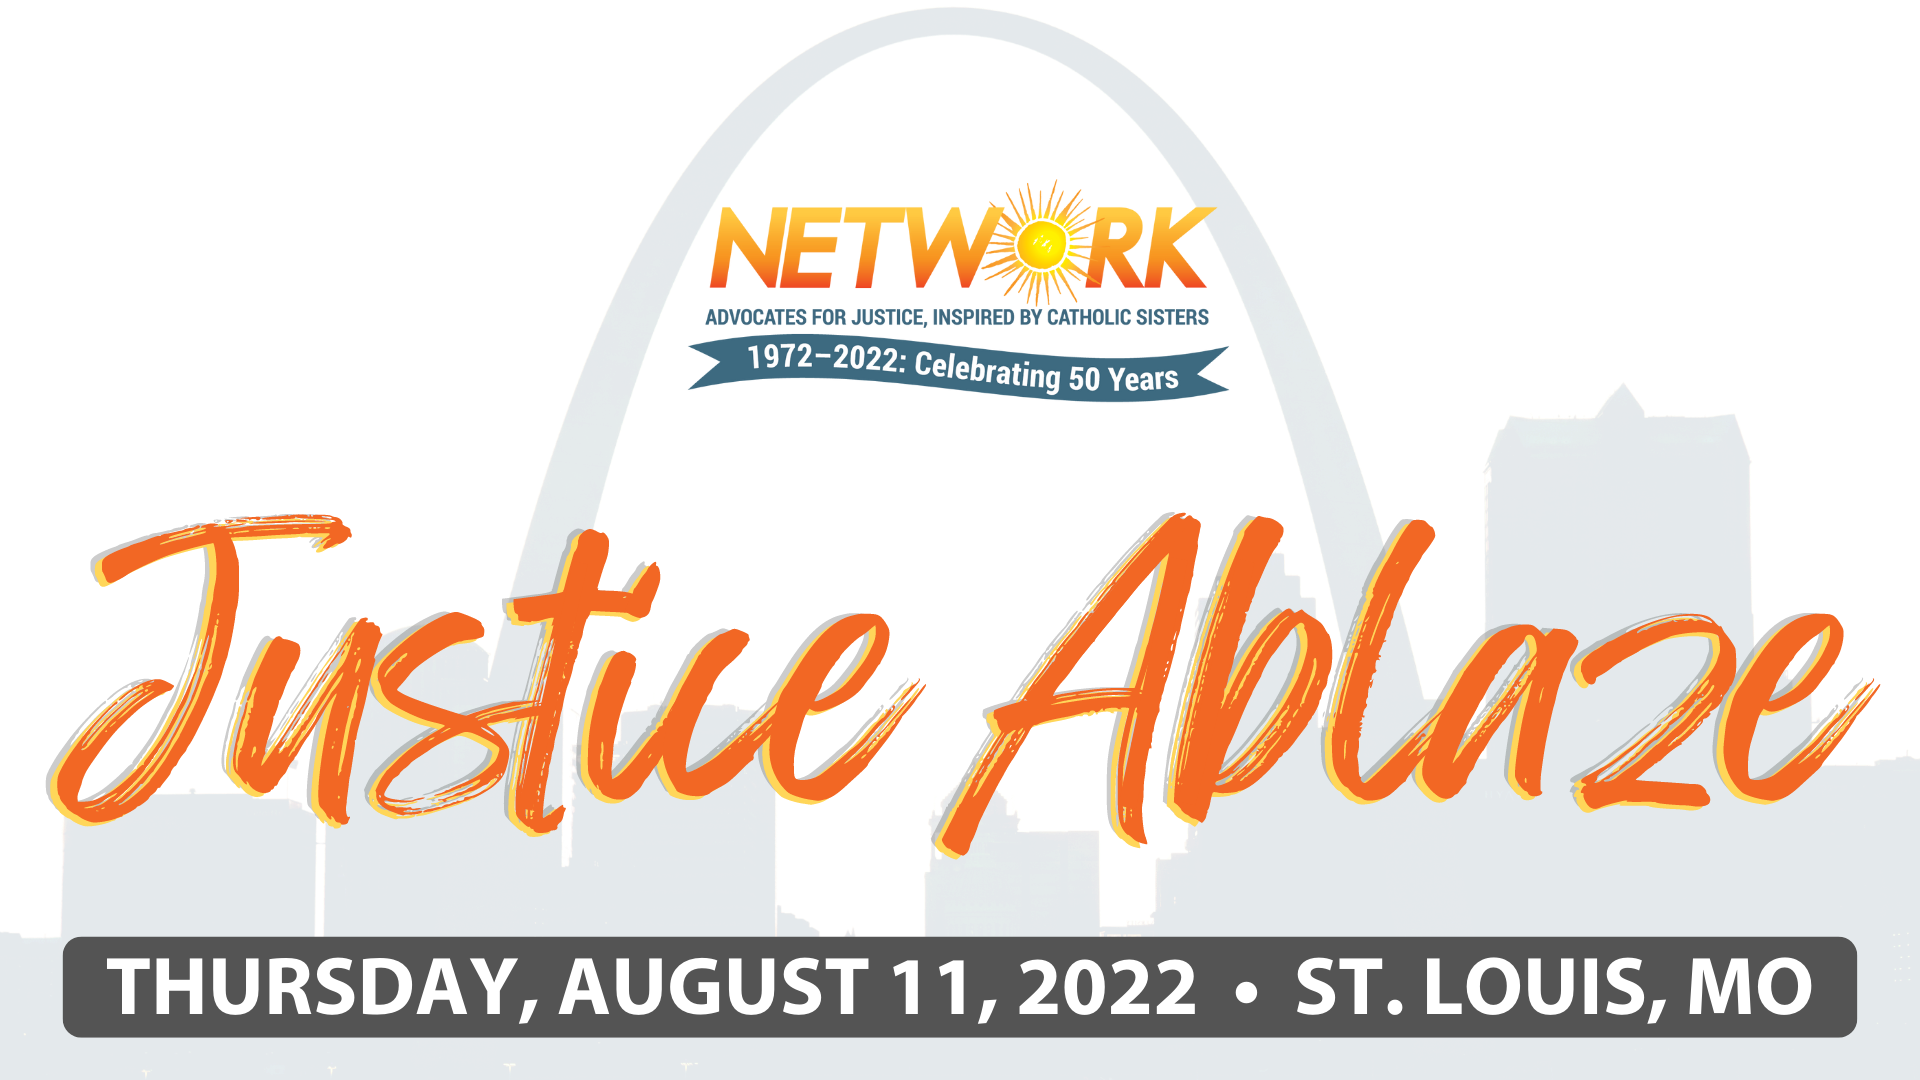 NETWORK Lobby Will Celebrate 50 Years of Work to Make Federal Policy that Works for Everybody with a Cocktail Party in St. Louis on Thursday, August 11, 2022 - Justice Ablaze St. Louis